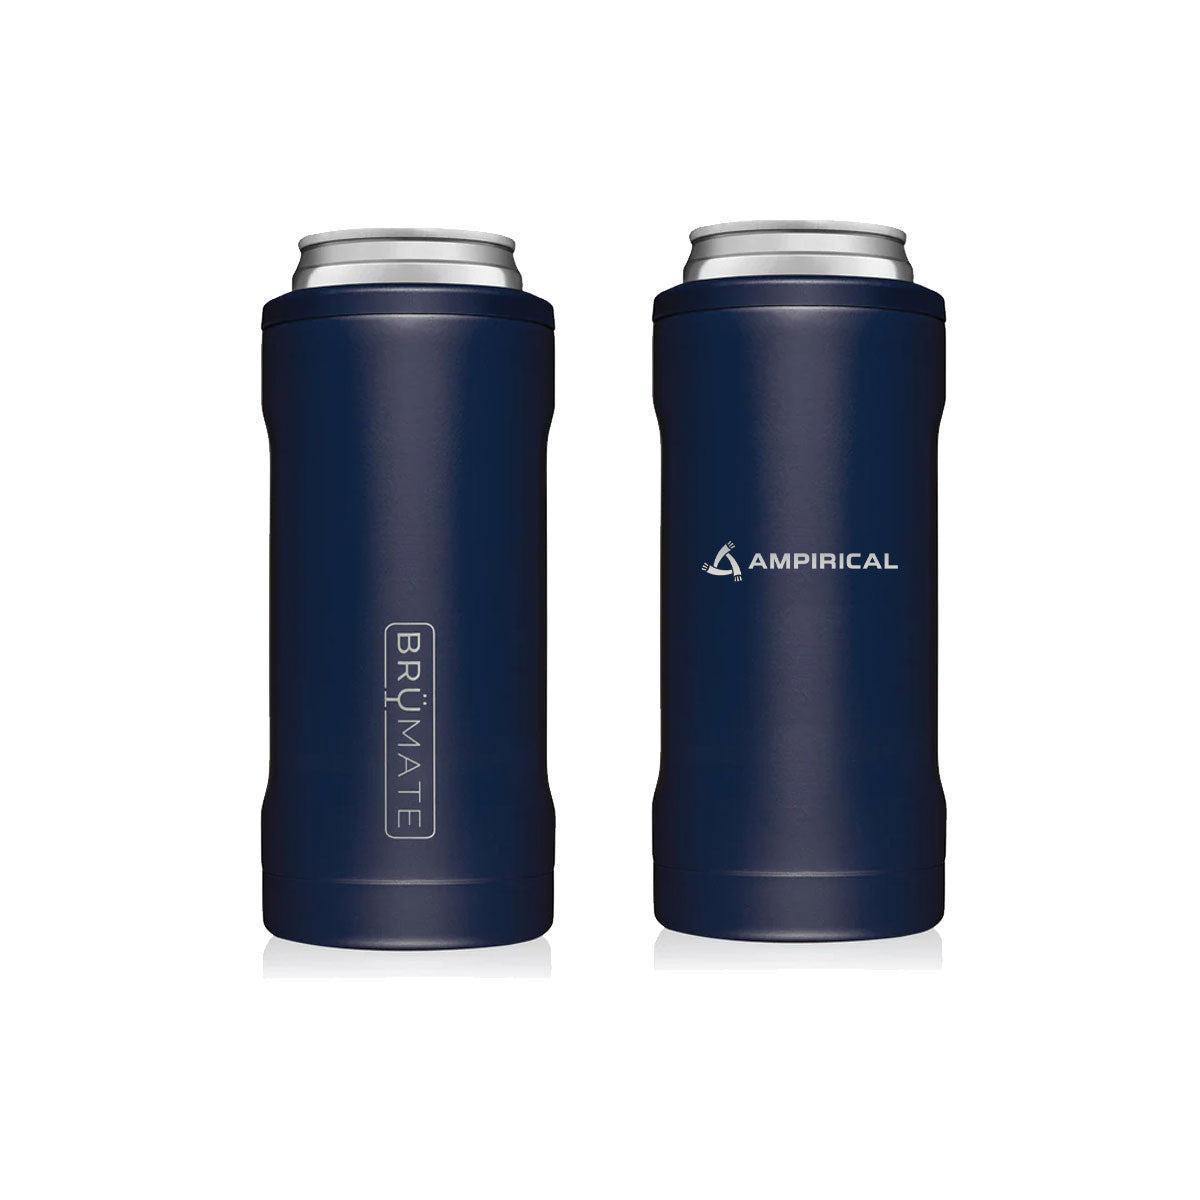 Personalized Brumate Slim Can Holder